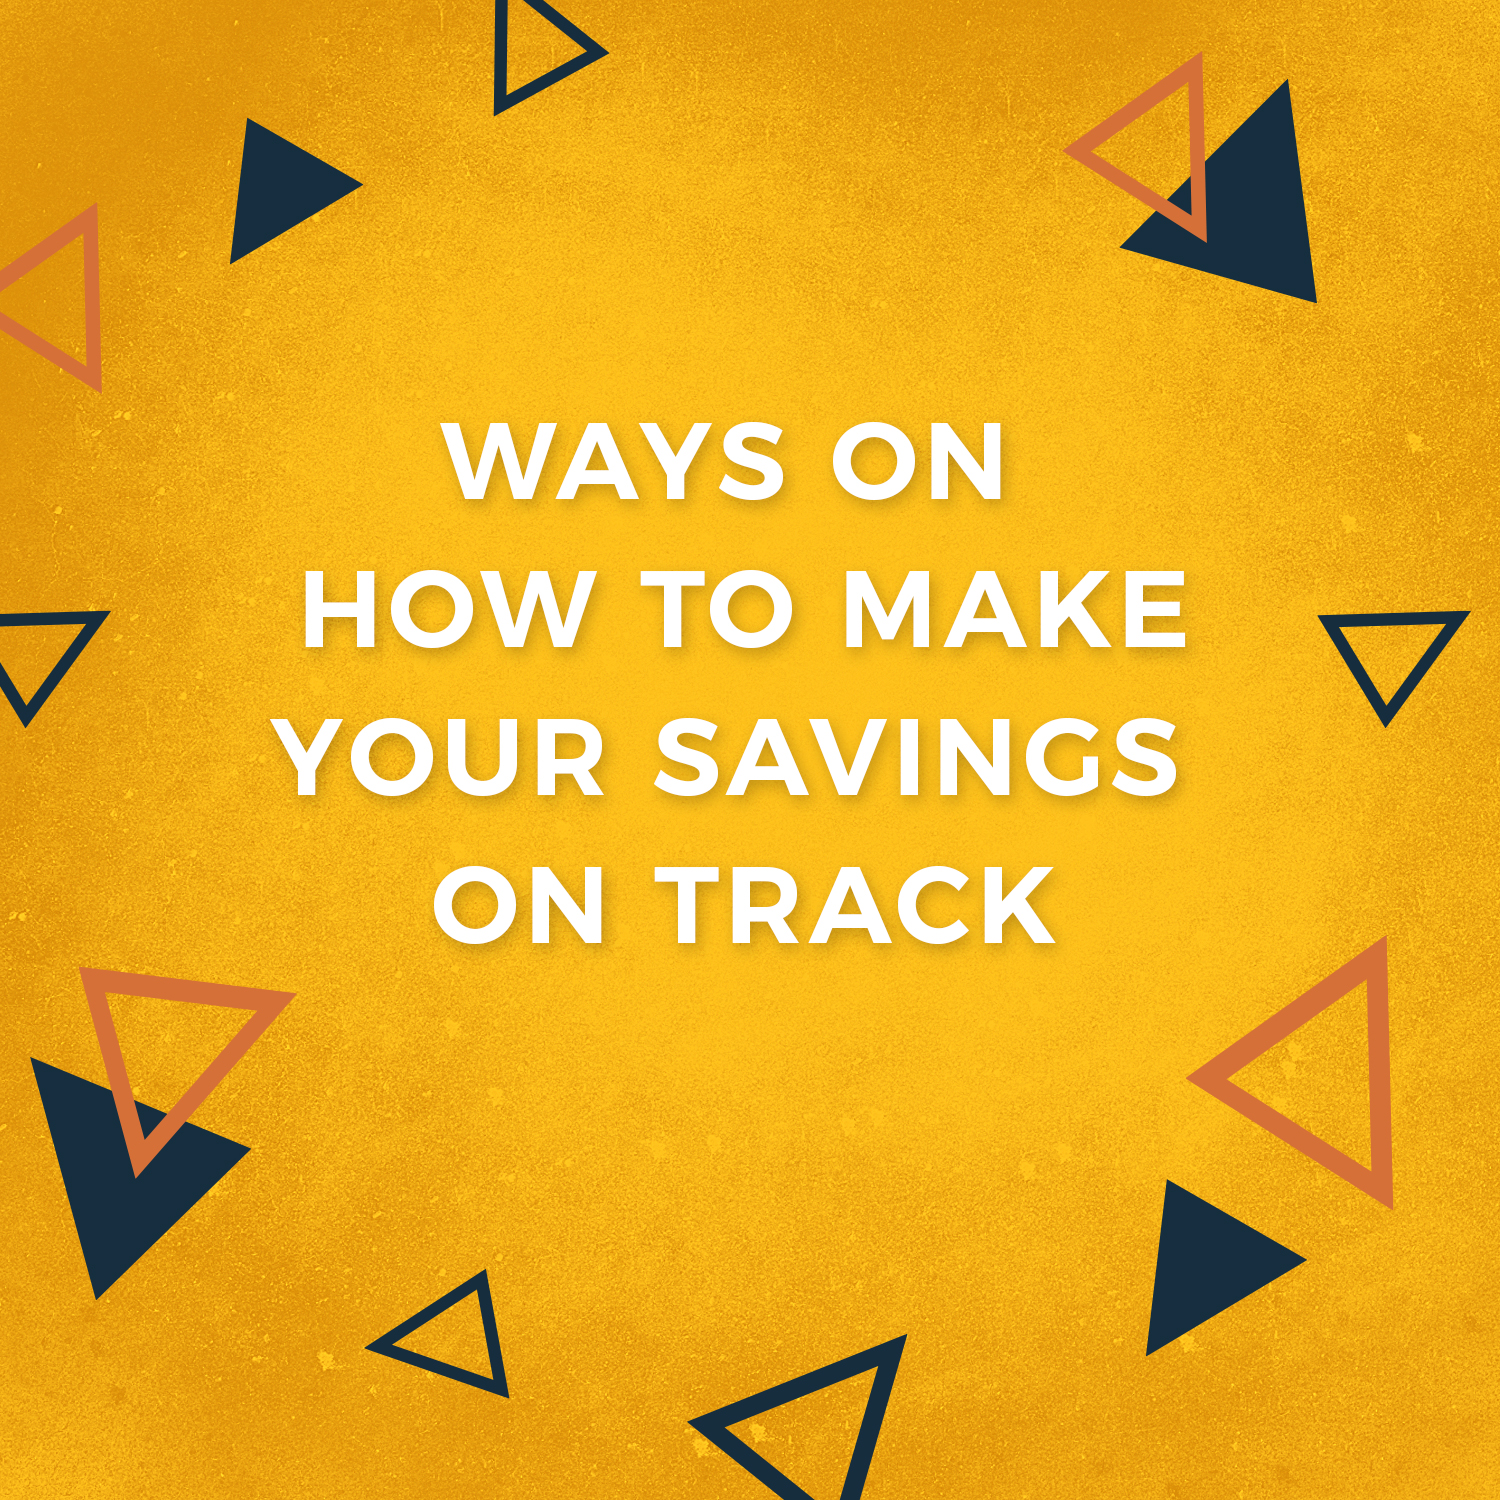 Ways On How To Make Your Savings On Track: Investing Money to Live Brighter with Sun Life Financial.